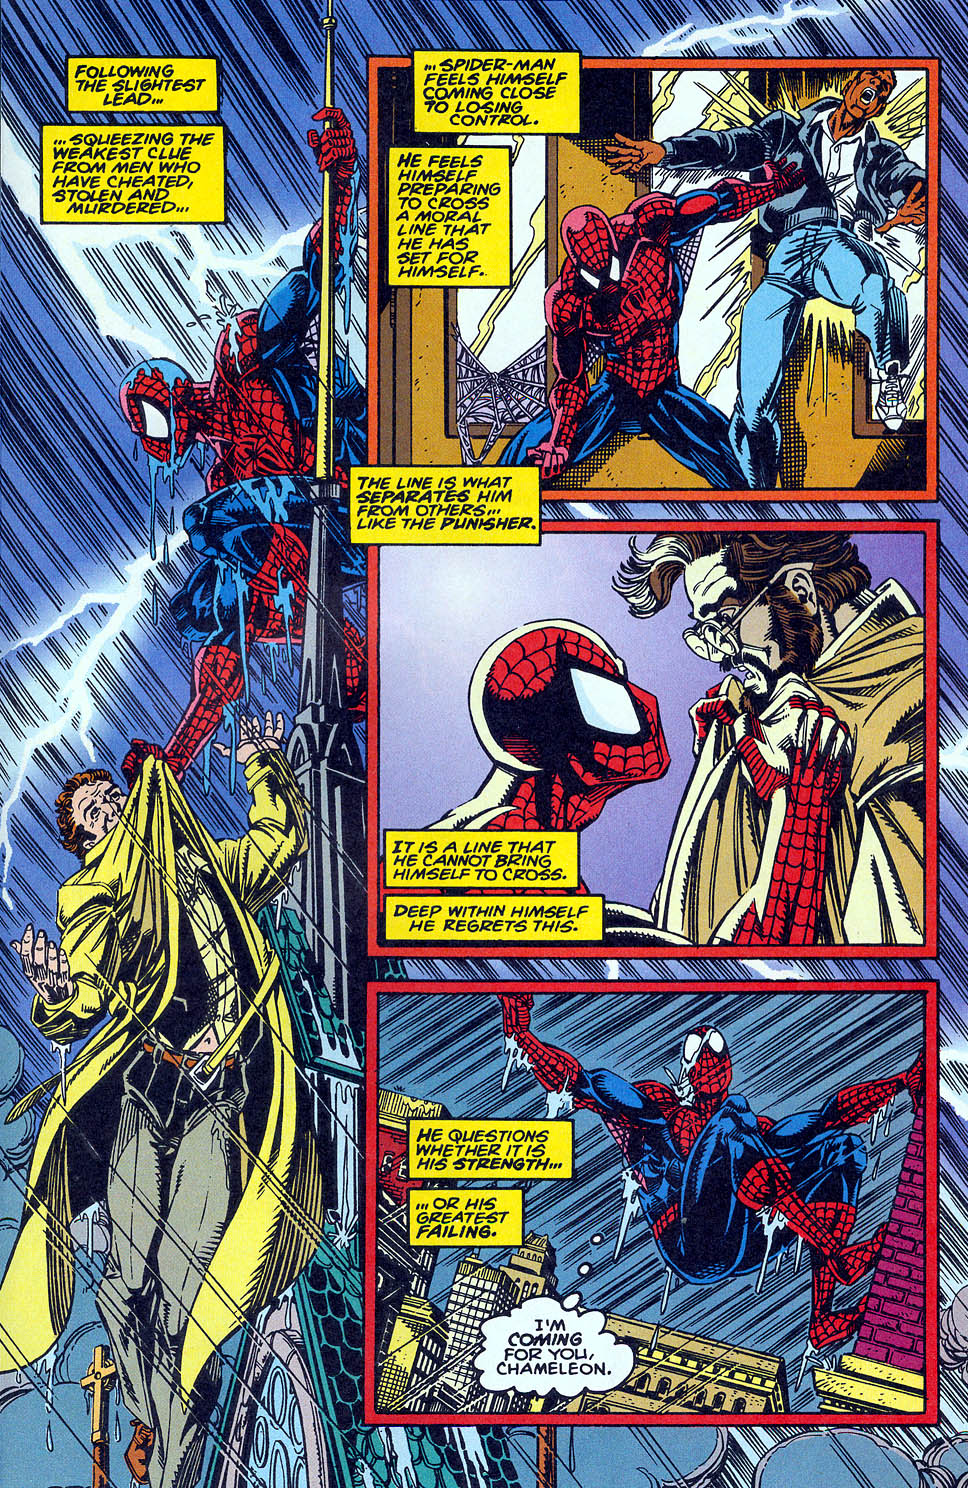 Spider-Man (1990) 45_-_The_Dream_Before Page 12